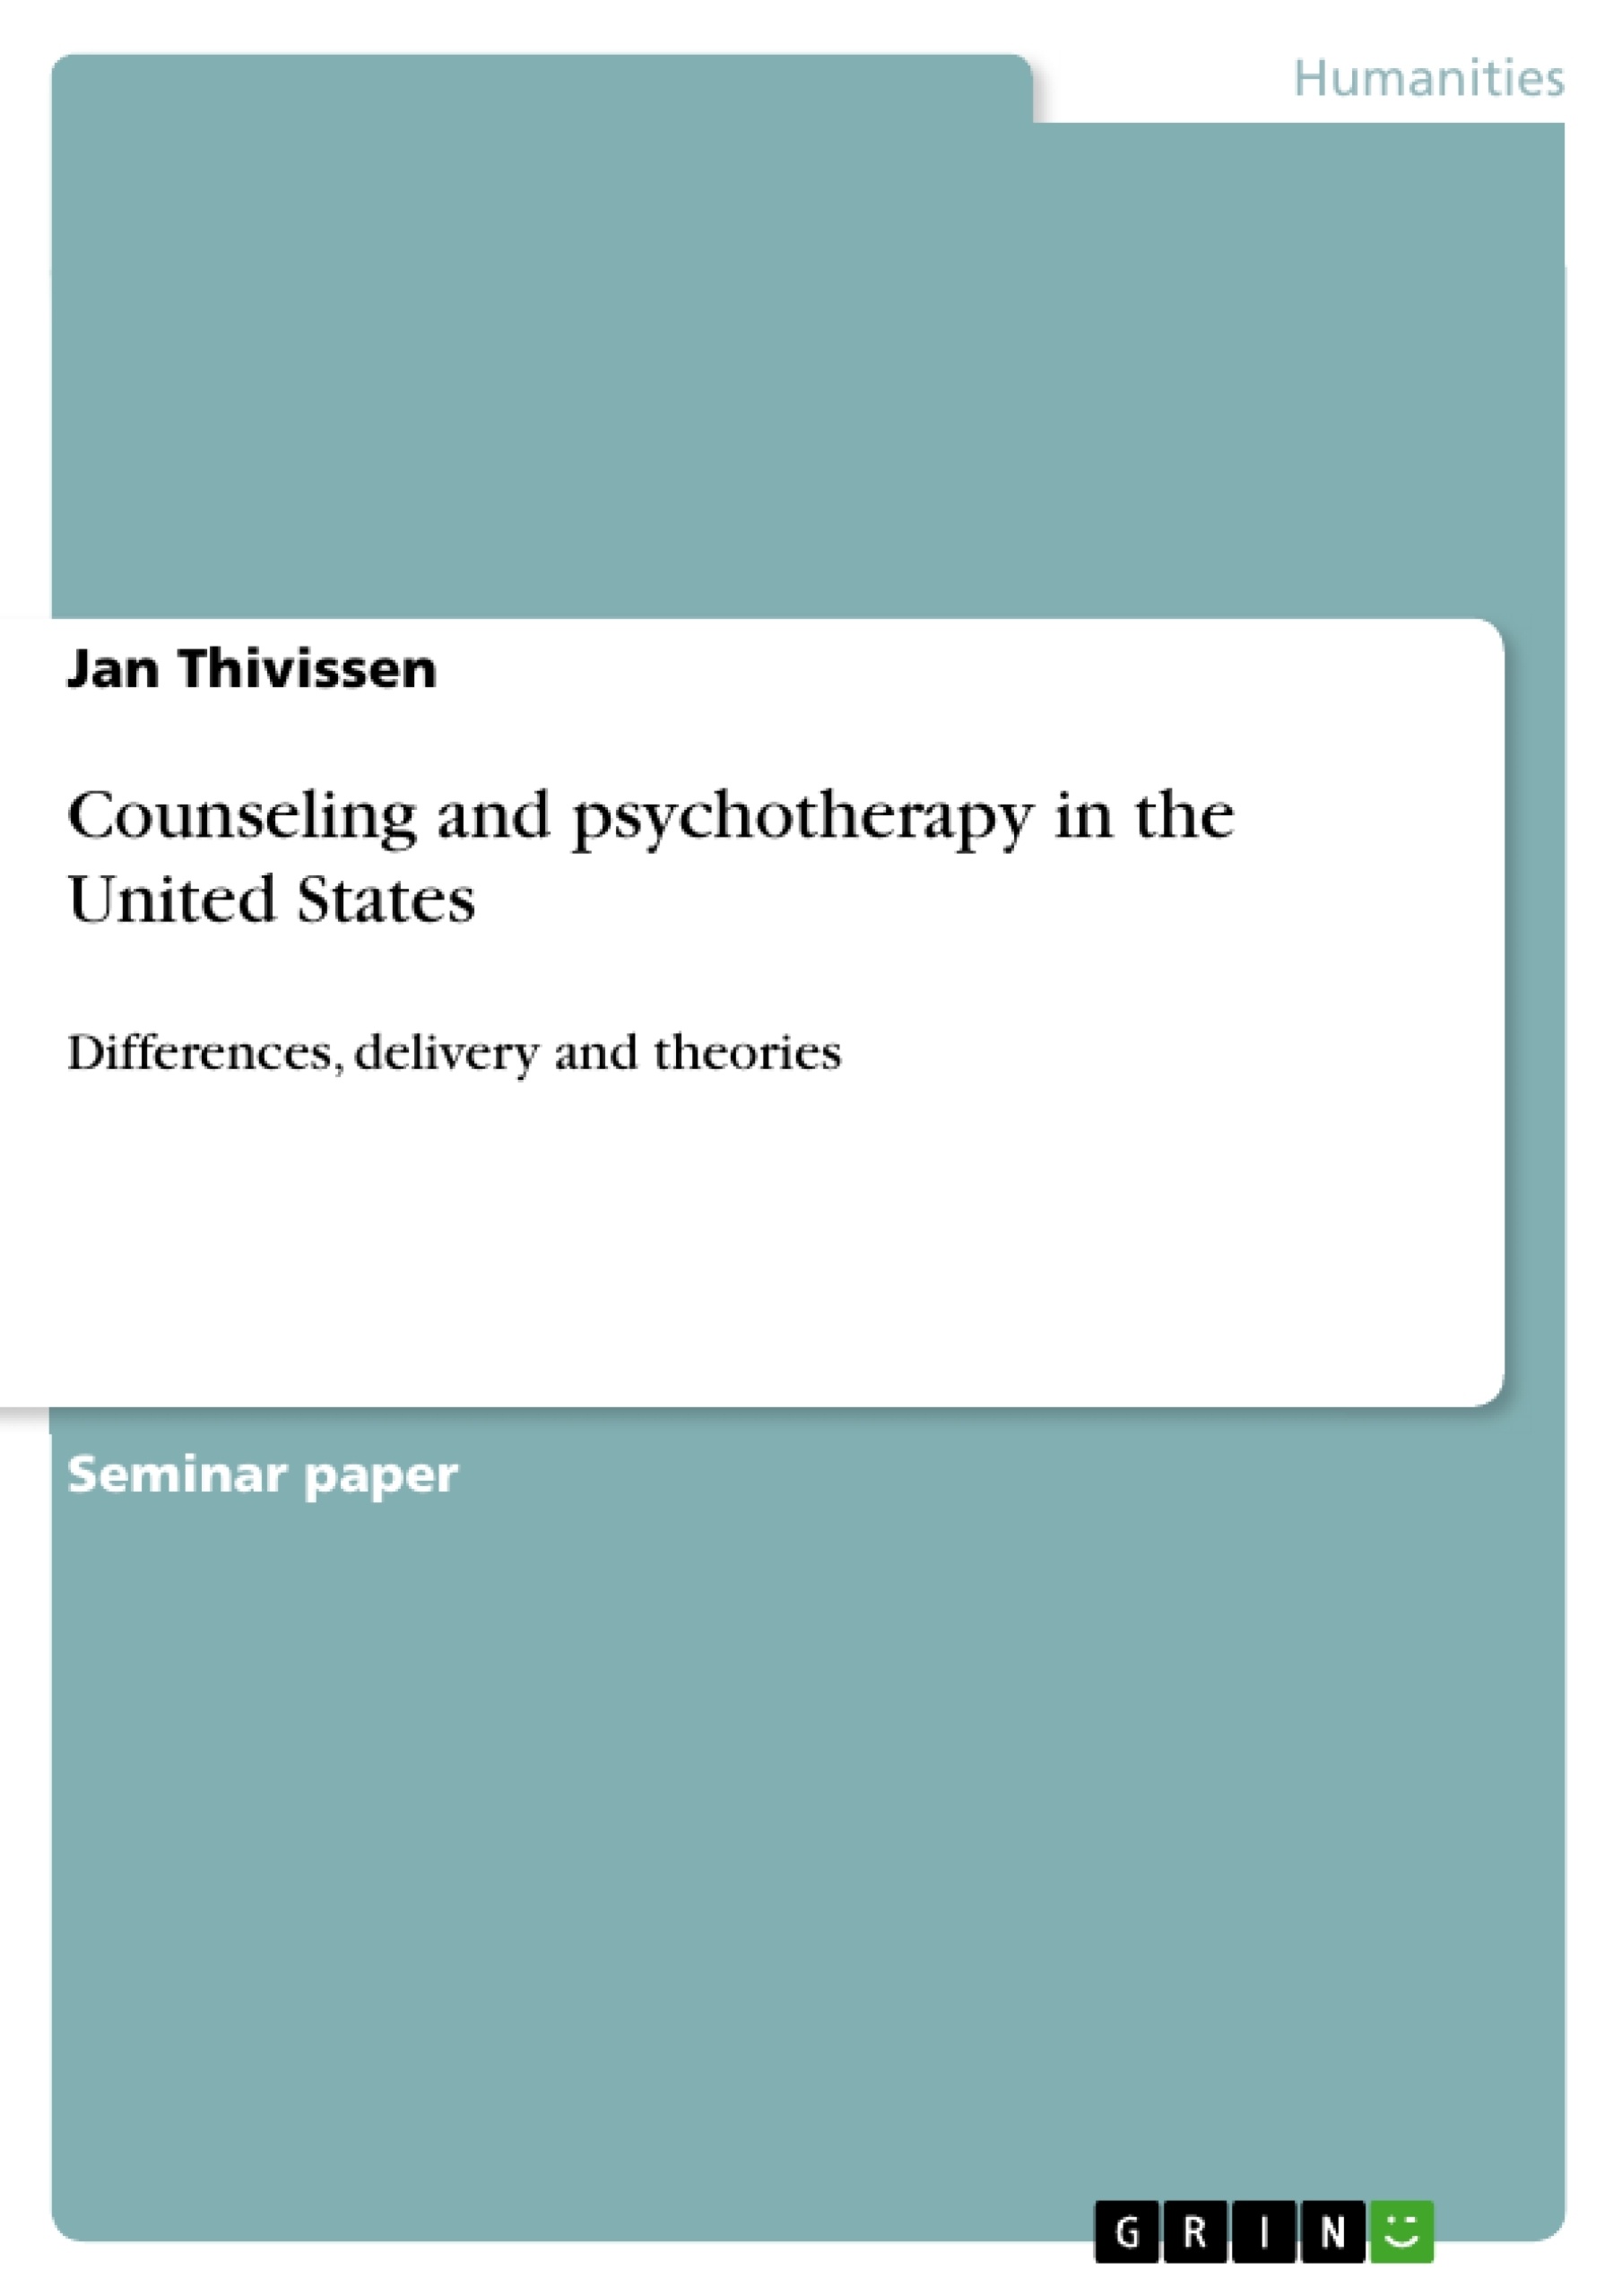 Titel: Counseling and psychotherapy in the United States